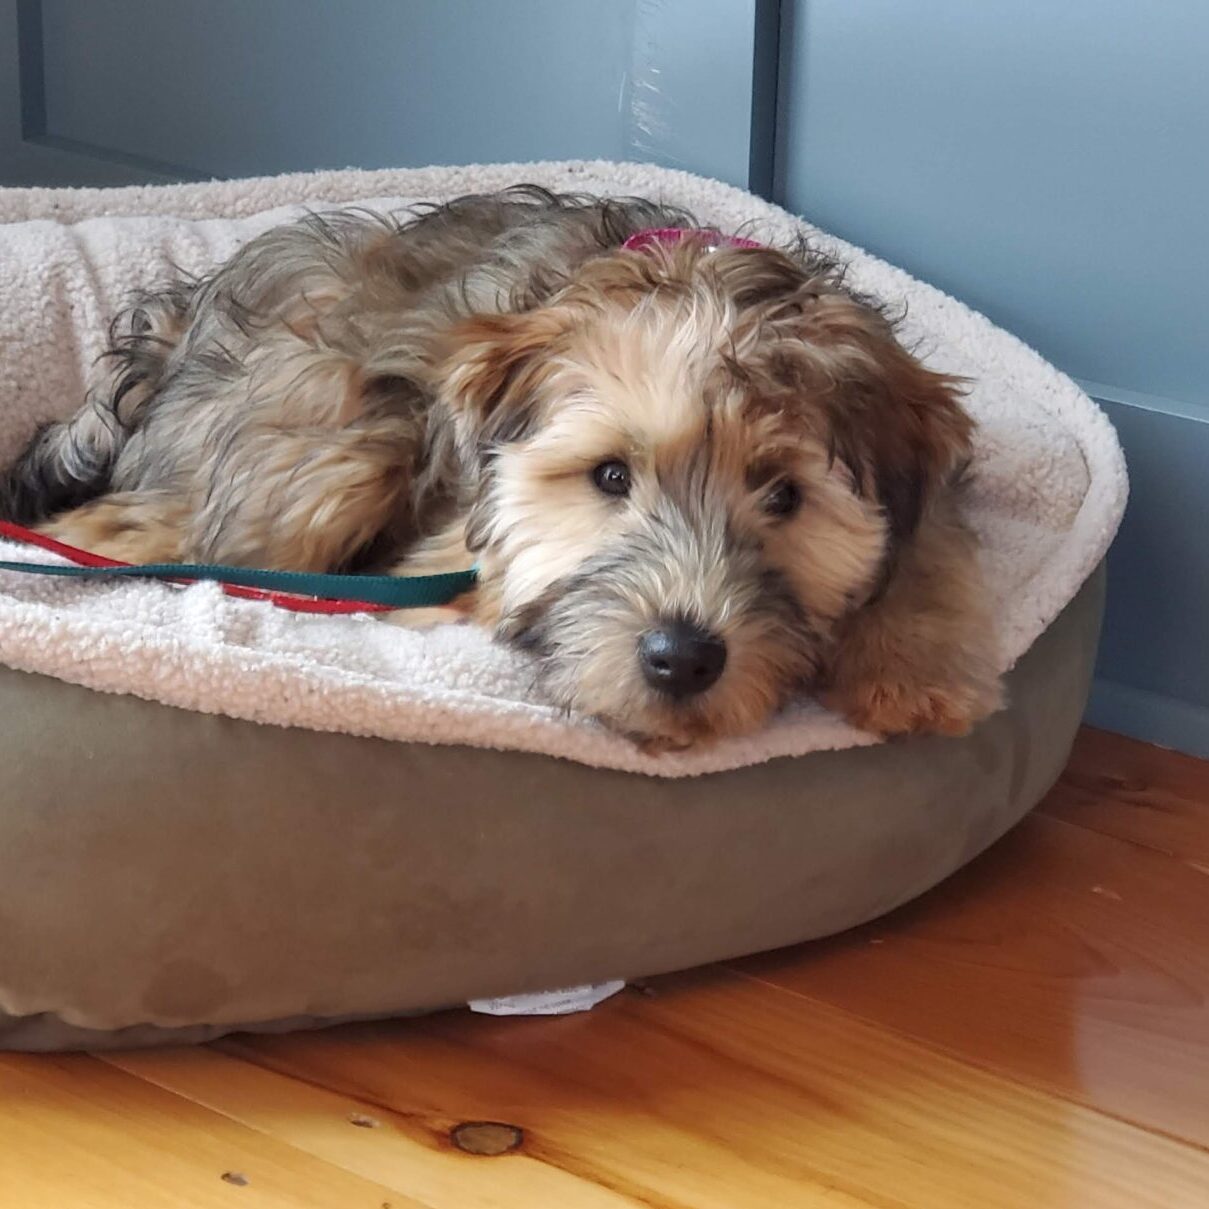 terrier lying calmly in dog bed